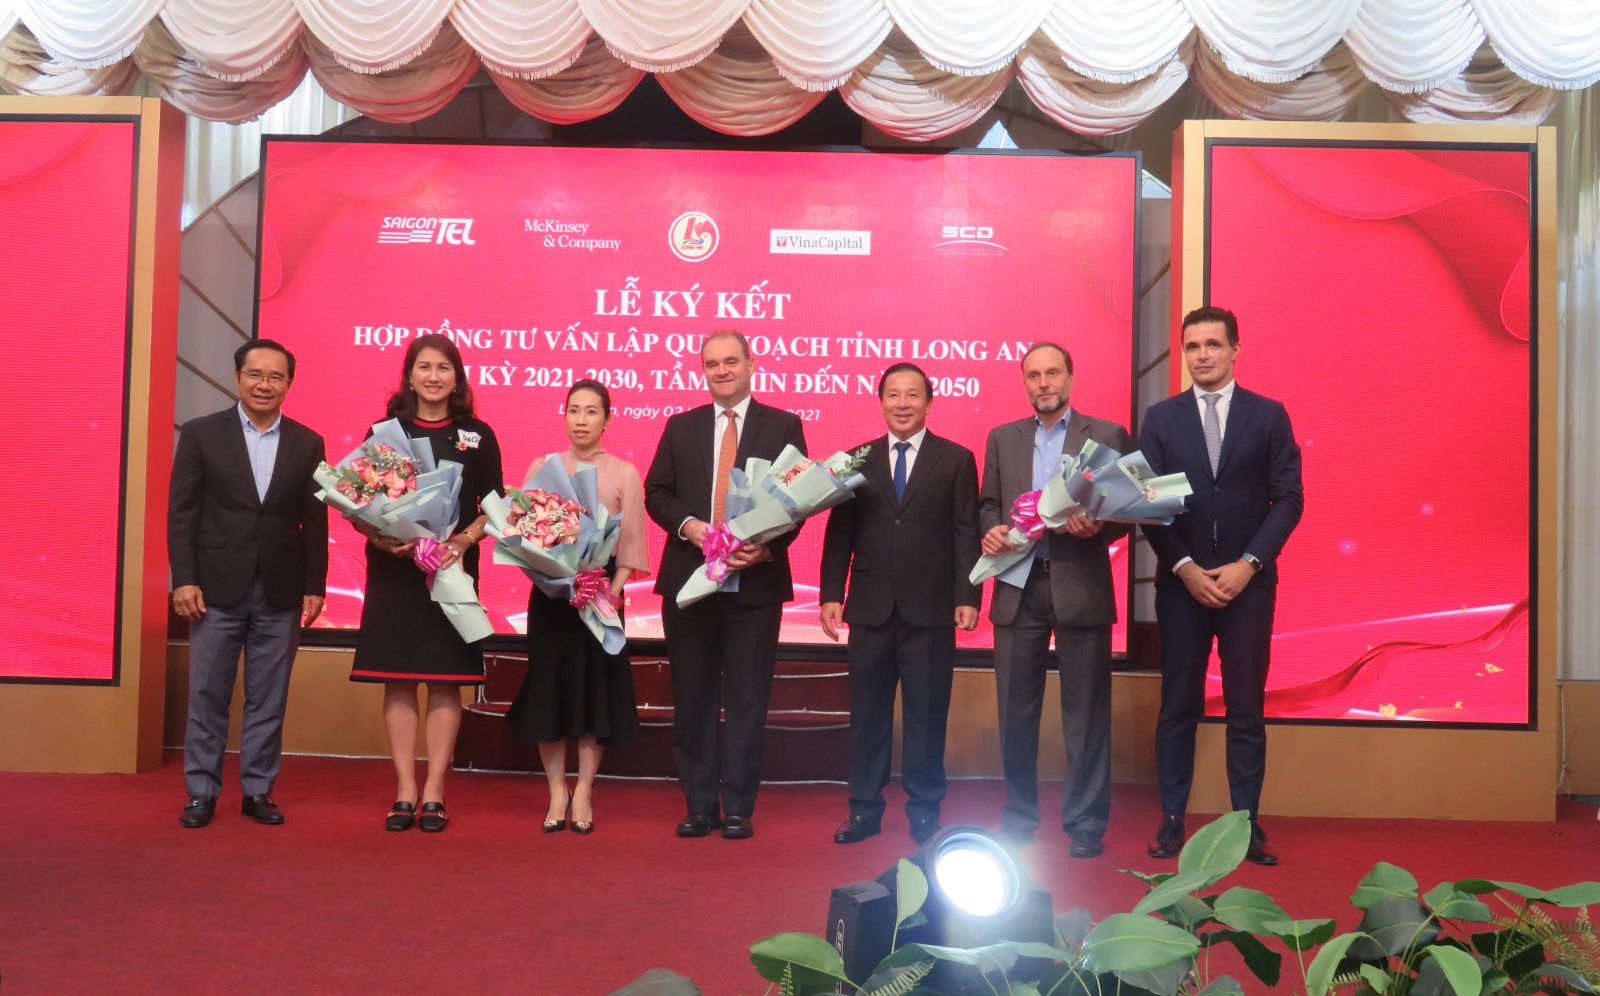 Secretary of the Provincial Party Committee, Chairman of the Provincial People's Council - Nguyen Van Duoc (L); Deputy Secretary of the Provincial Party Committee, Chairman of the Provincial People's Committee - Nguyen Van Ut (3rd, R) present flowers to the consultant unit and the sponsor